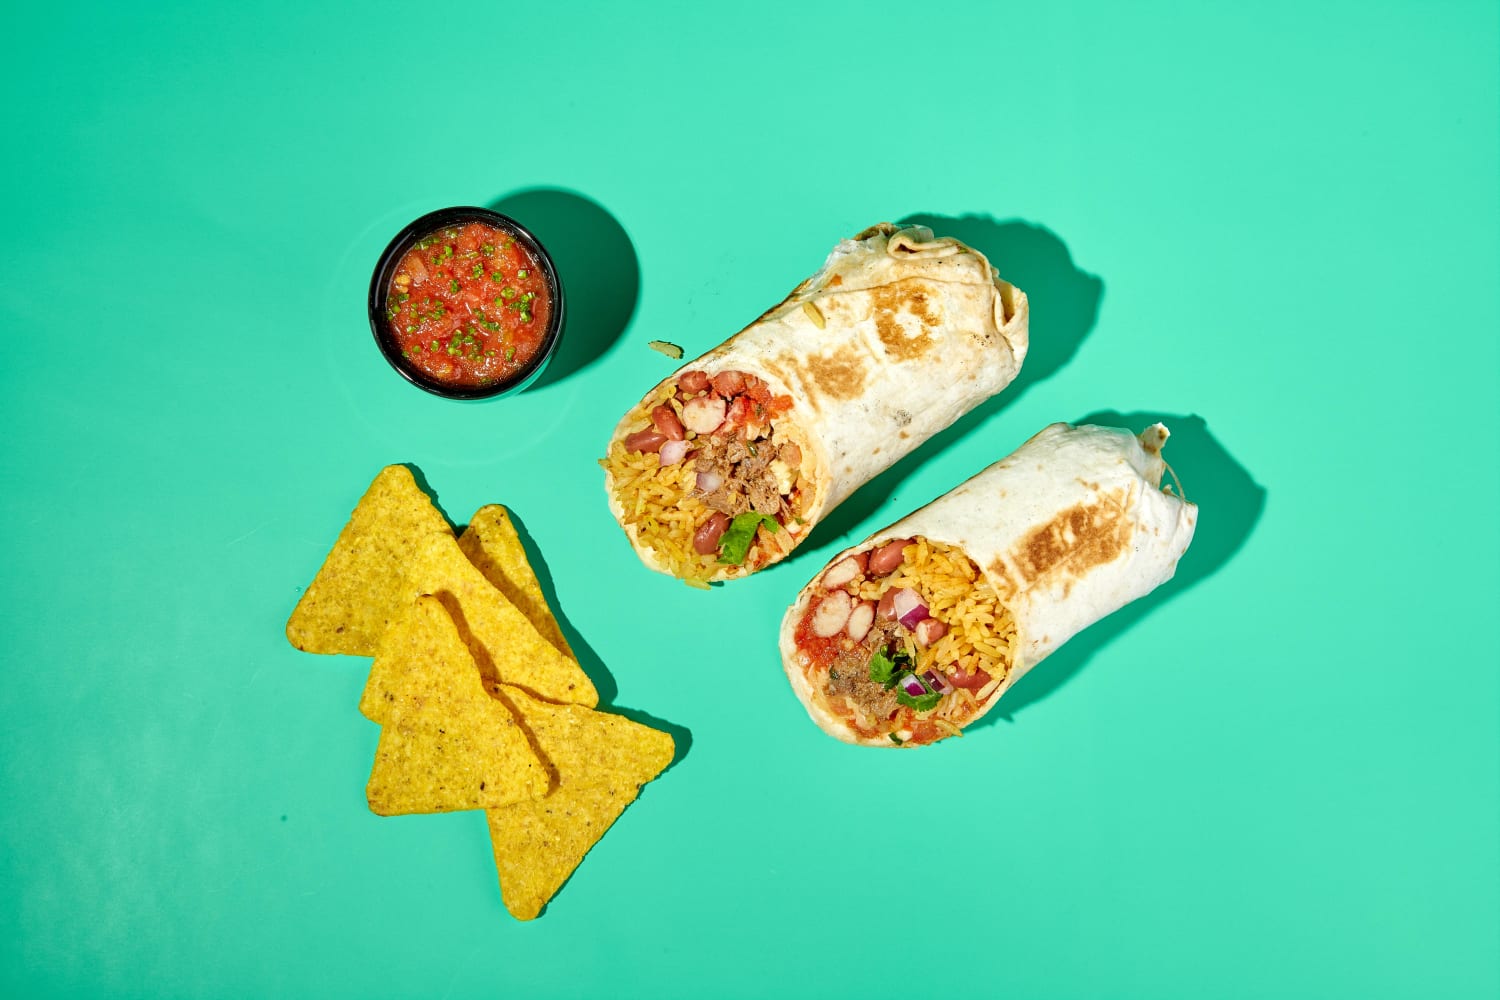 16 National Burrito Day deals to fill your pocket with savings